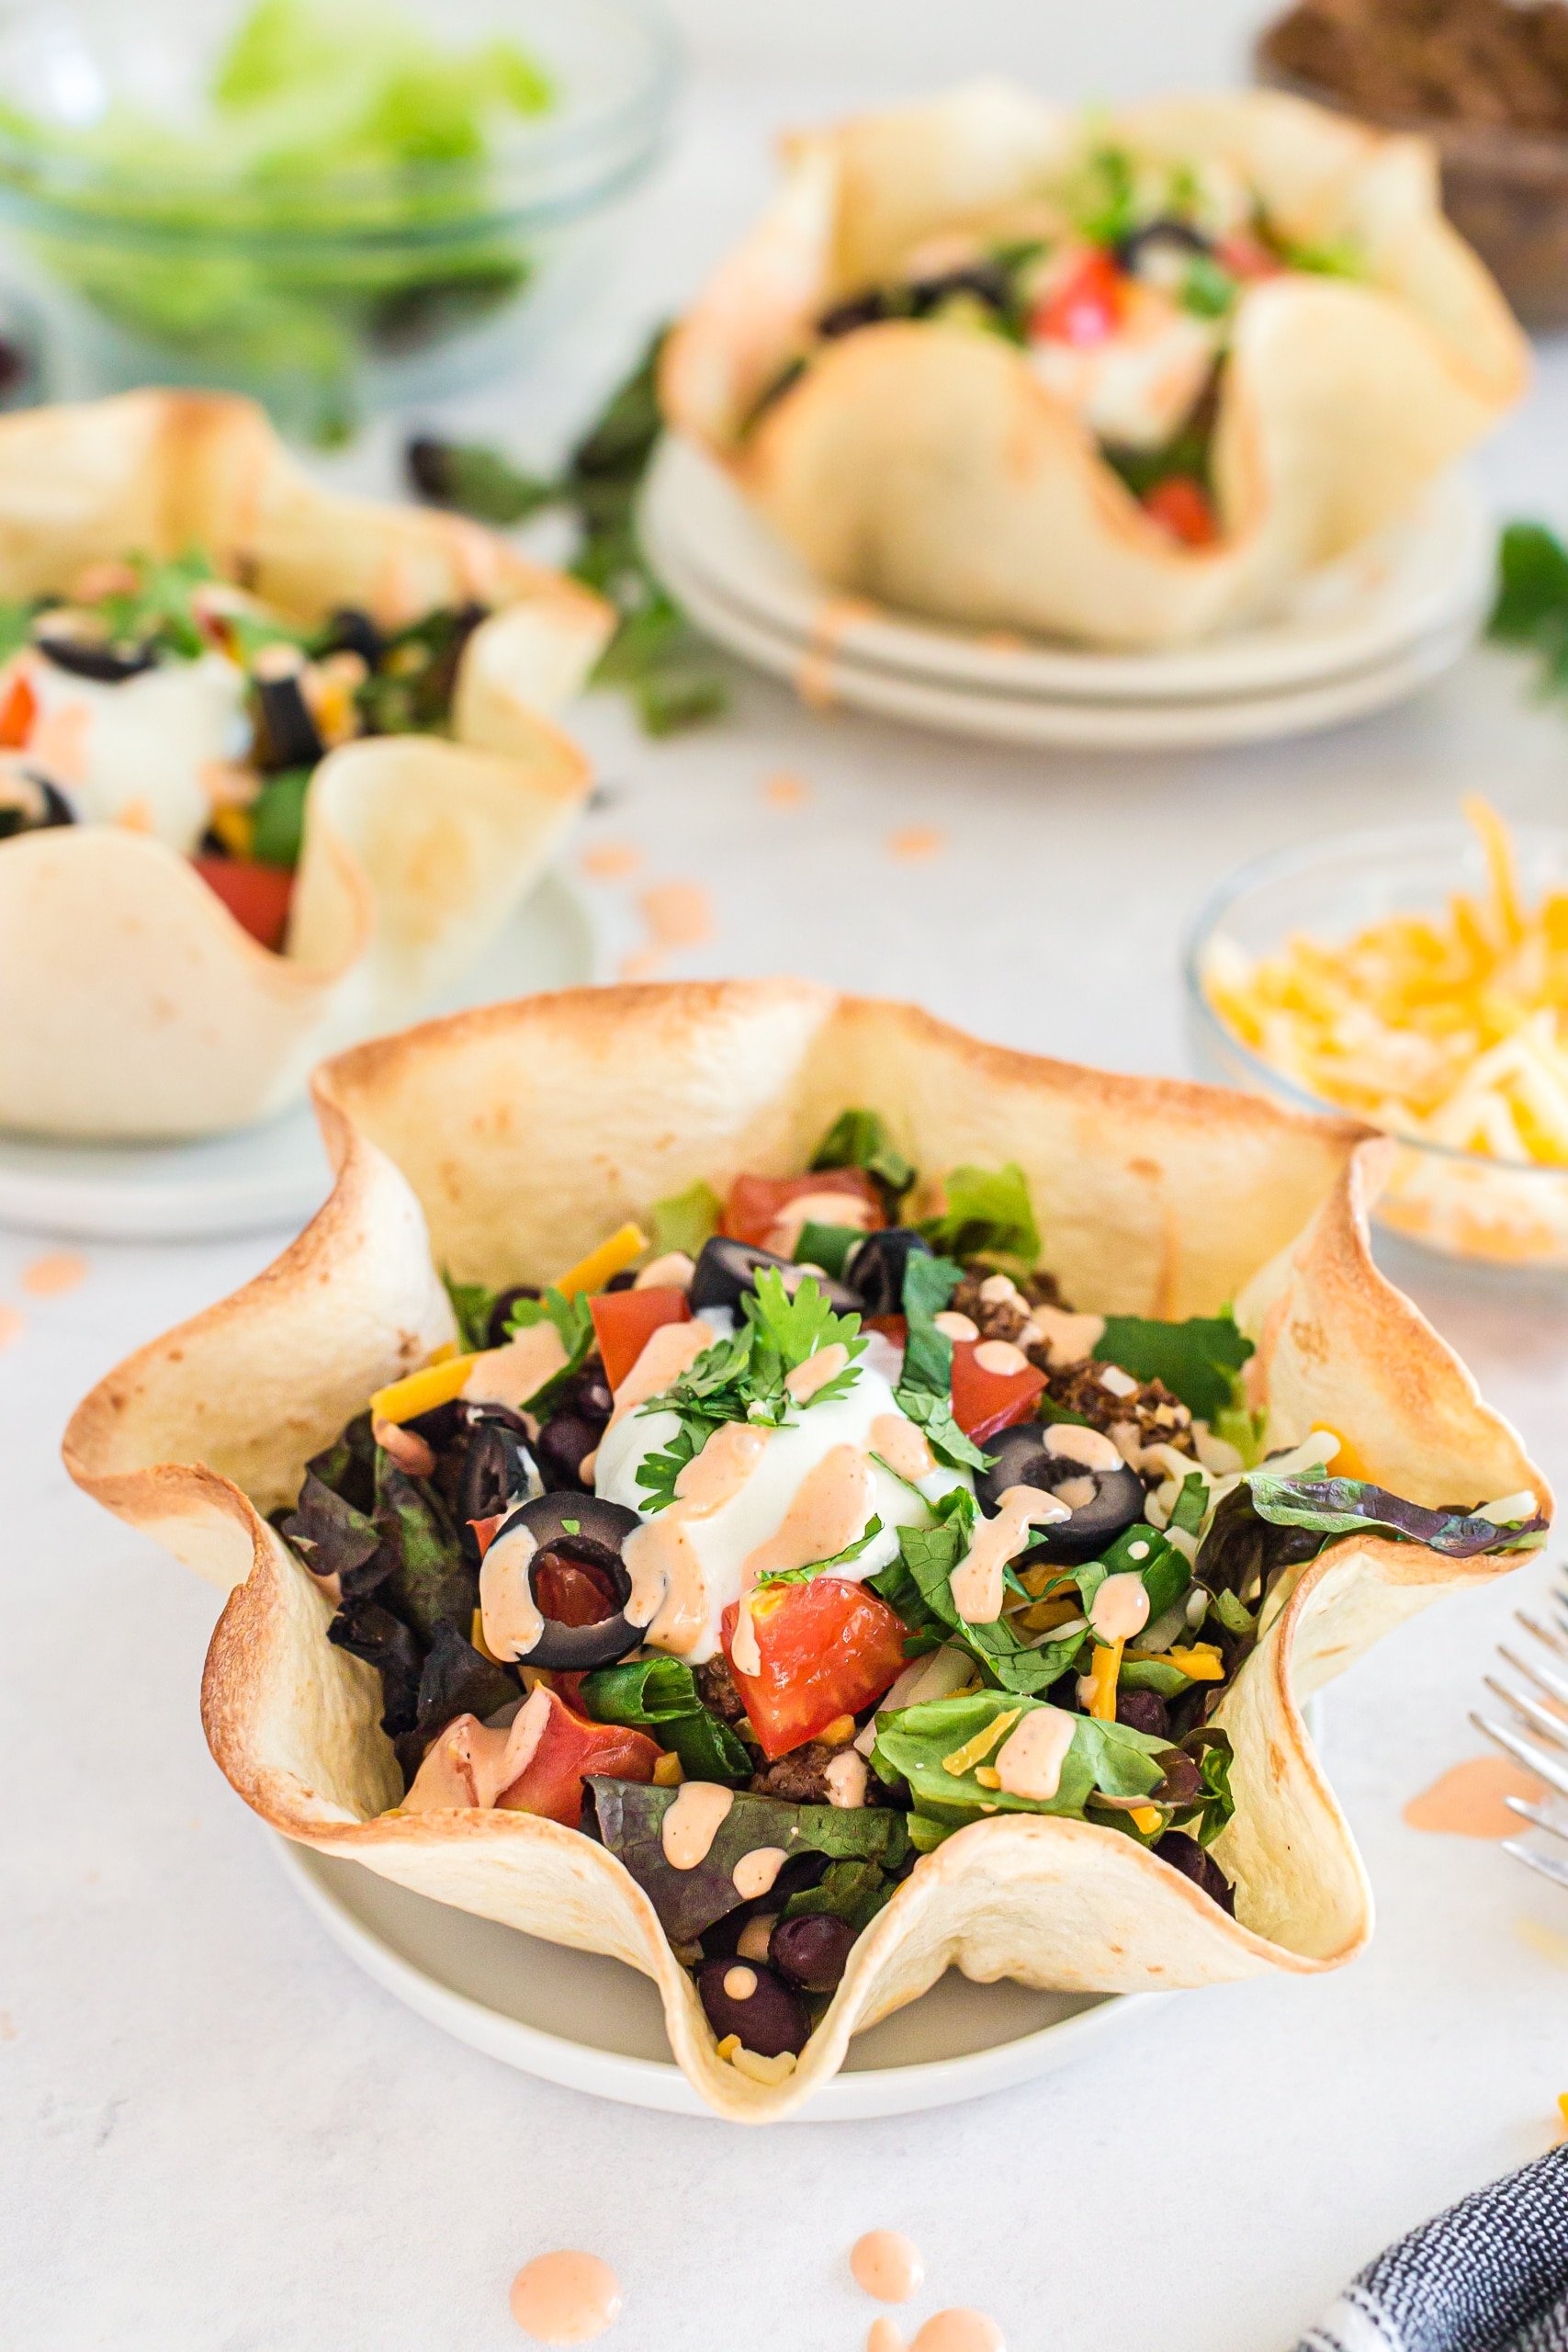 taco salad prepared in a bowl made from a flour tortilla